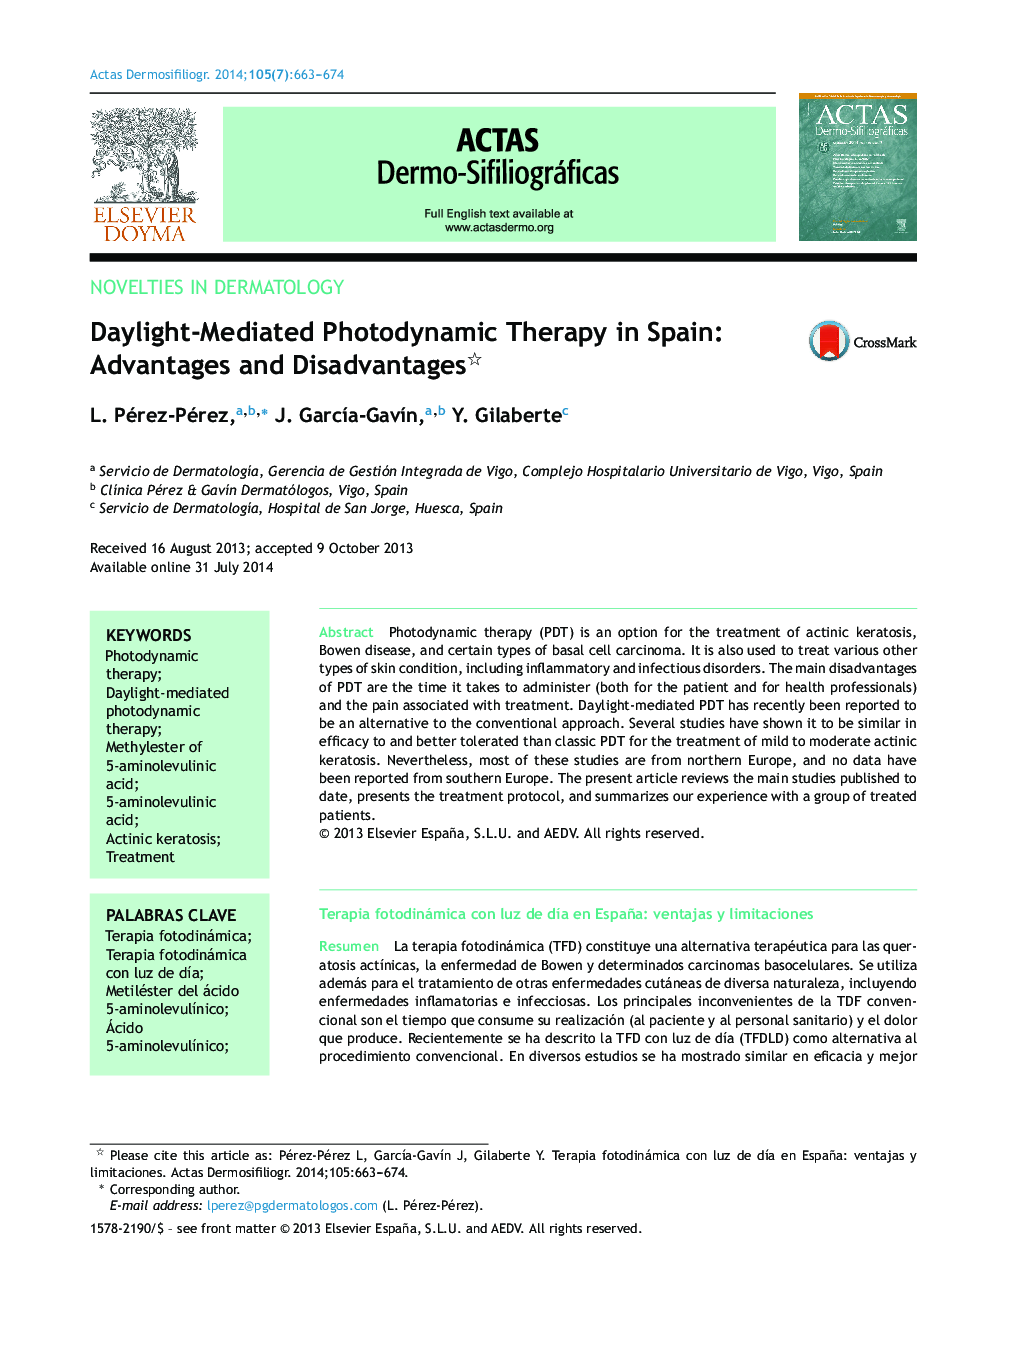 Daylight-Mediated Photodynamic Therapy in Spain: Advantages and Disadvantages 